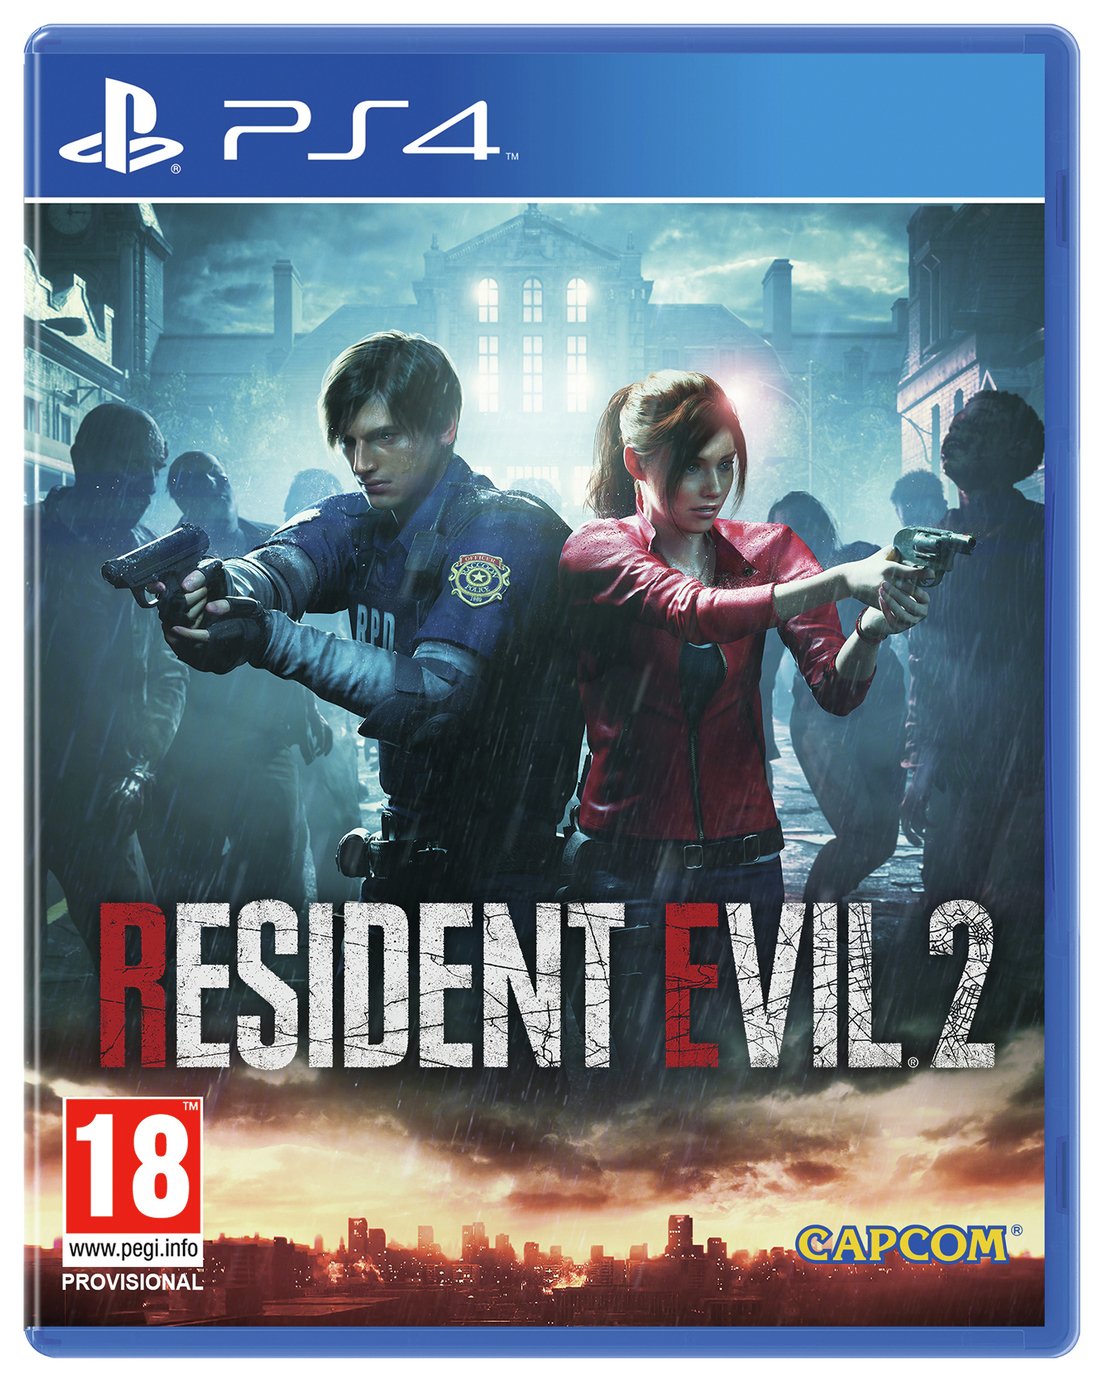 How Much Is Resident Evil On Ps4